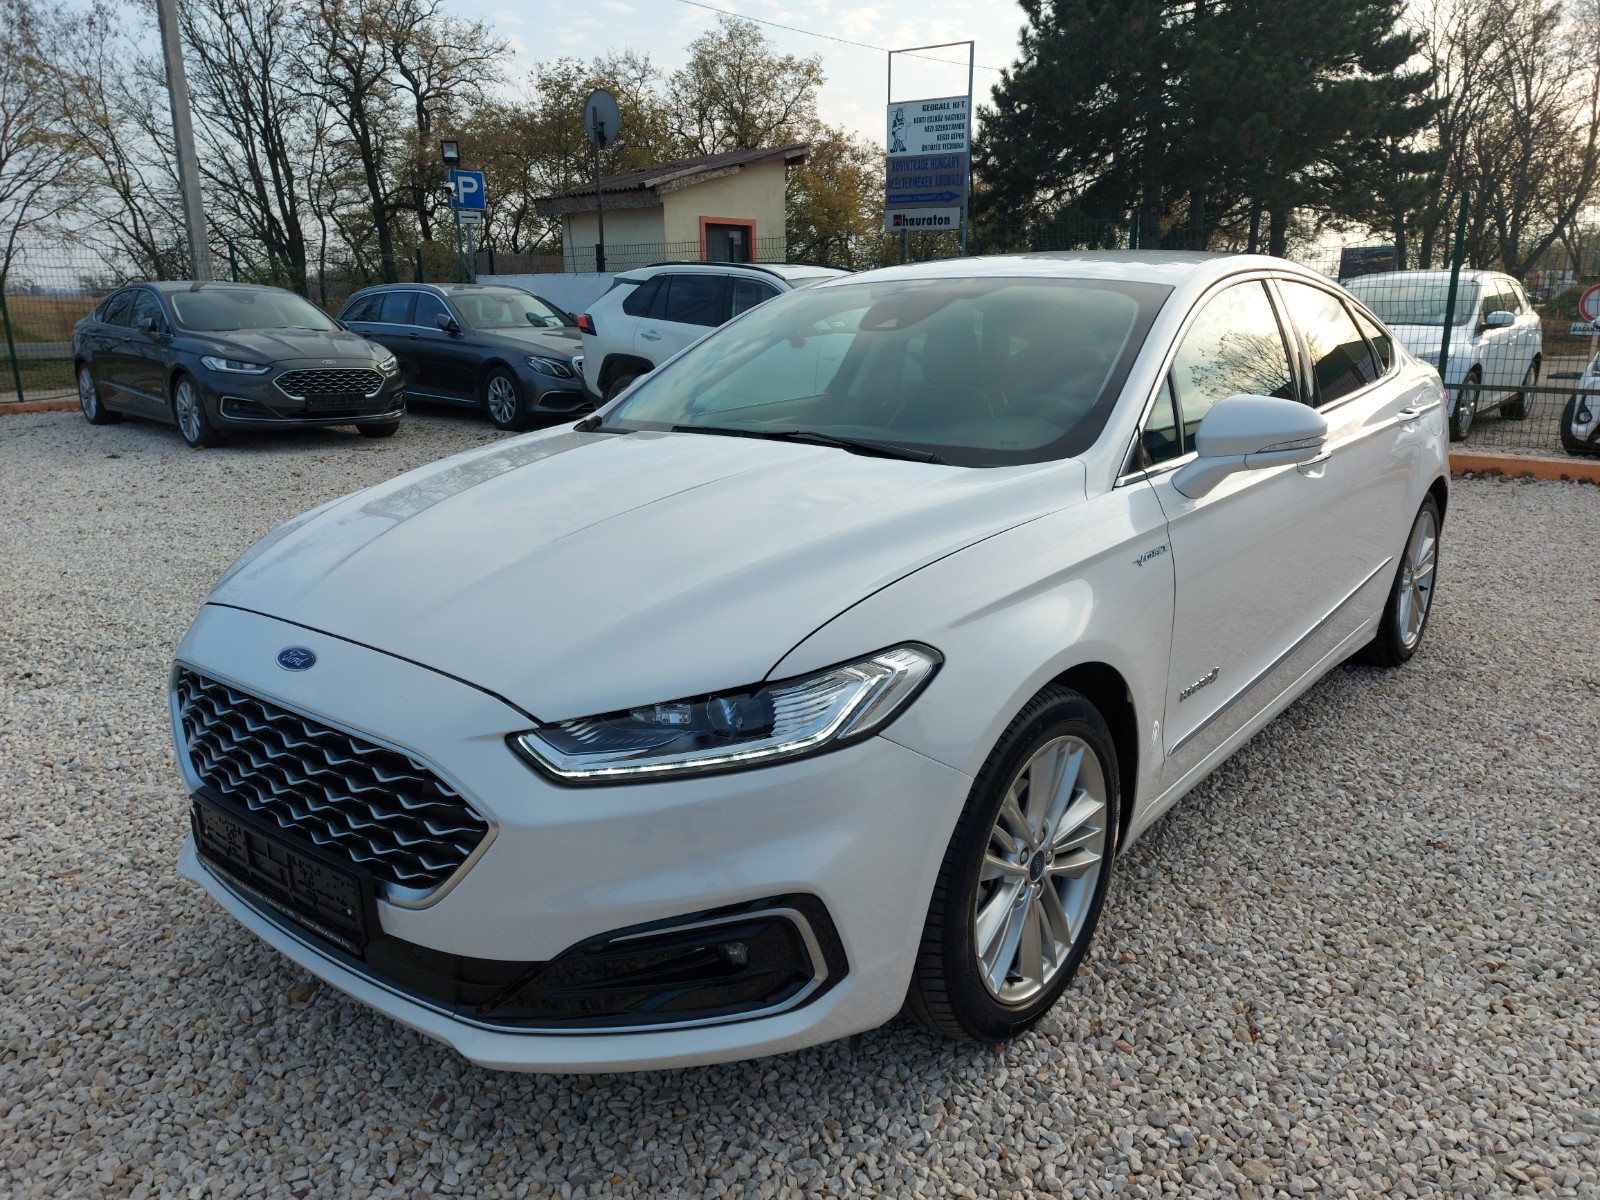 FORD MONDEO 2.0 HEV Vignale (Automata) FACELIFT (24)